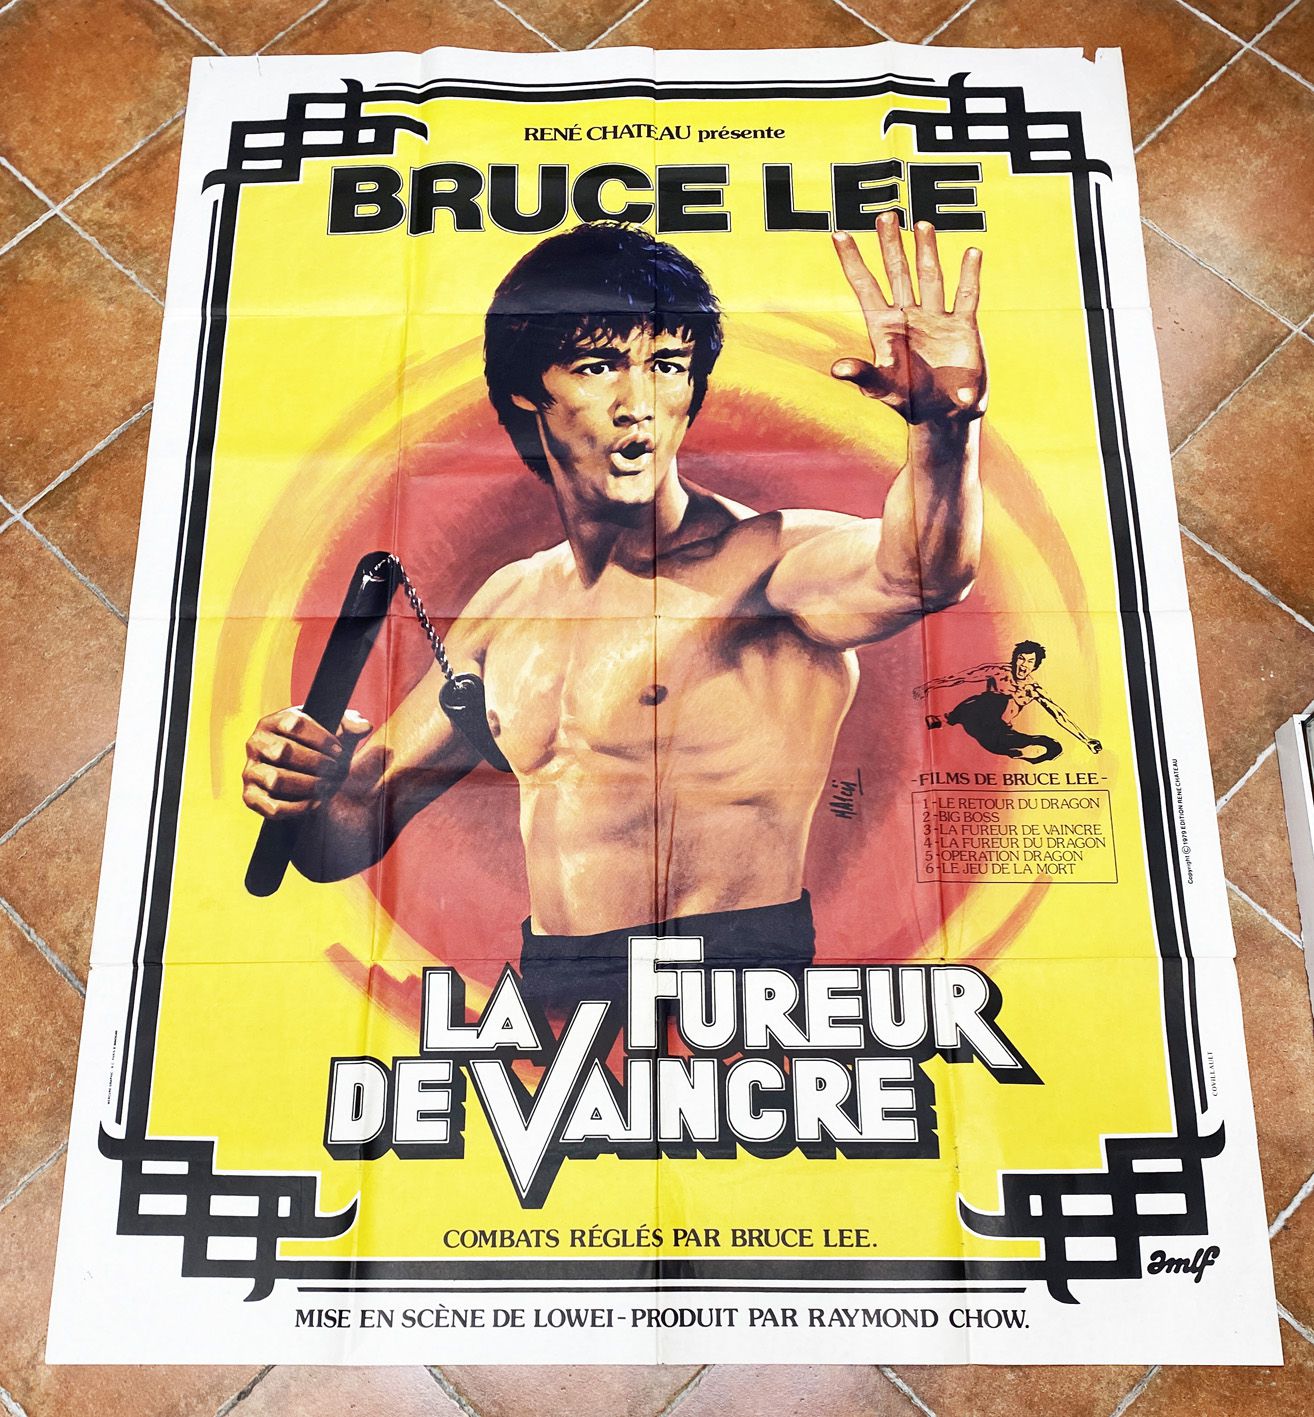 Bruce Lee, Fist of Fury - Movie Poster 120x160cm - René Chateau (1979)